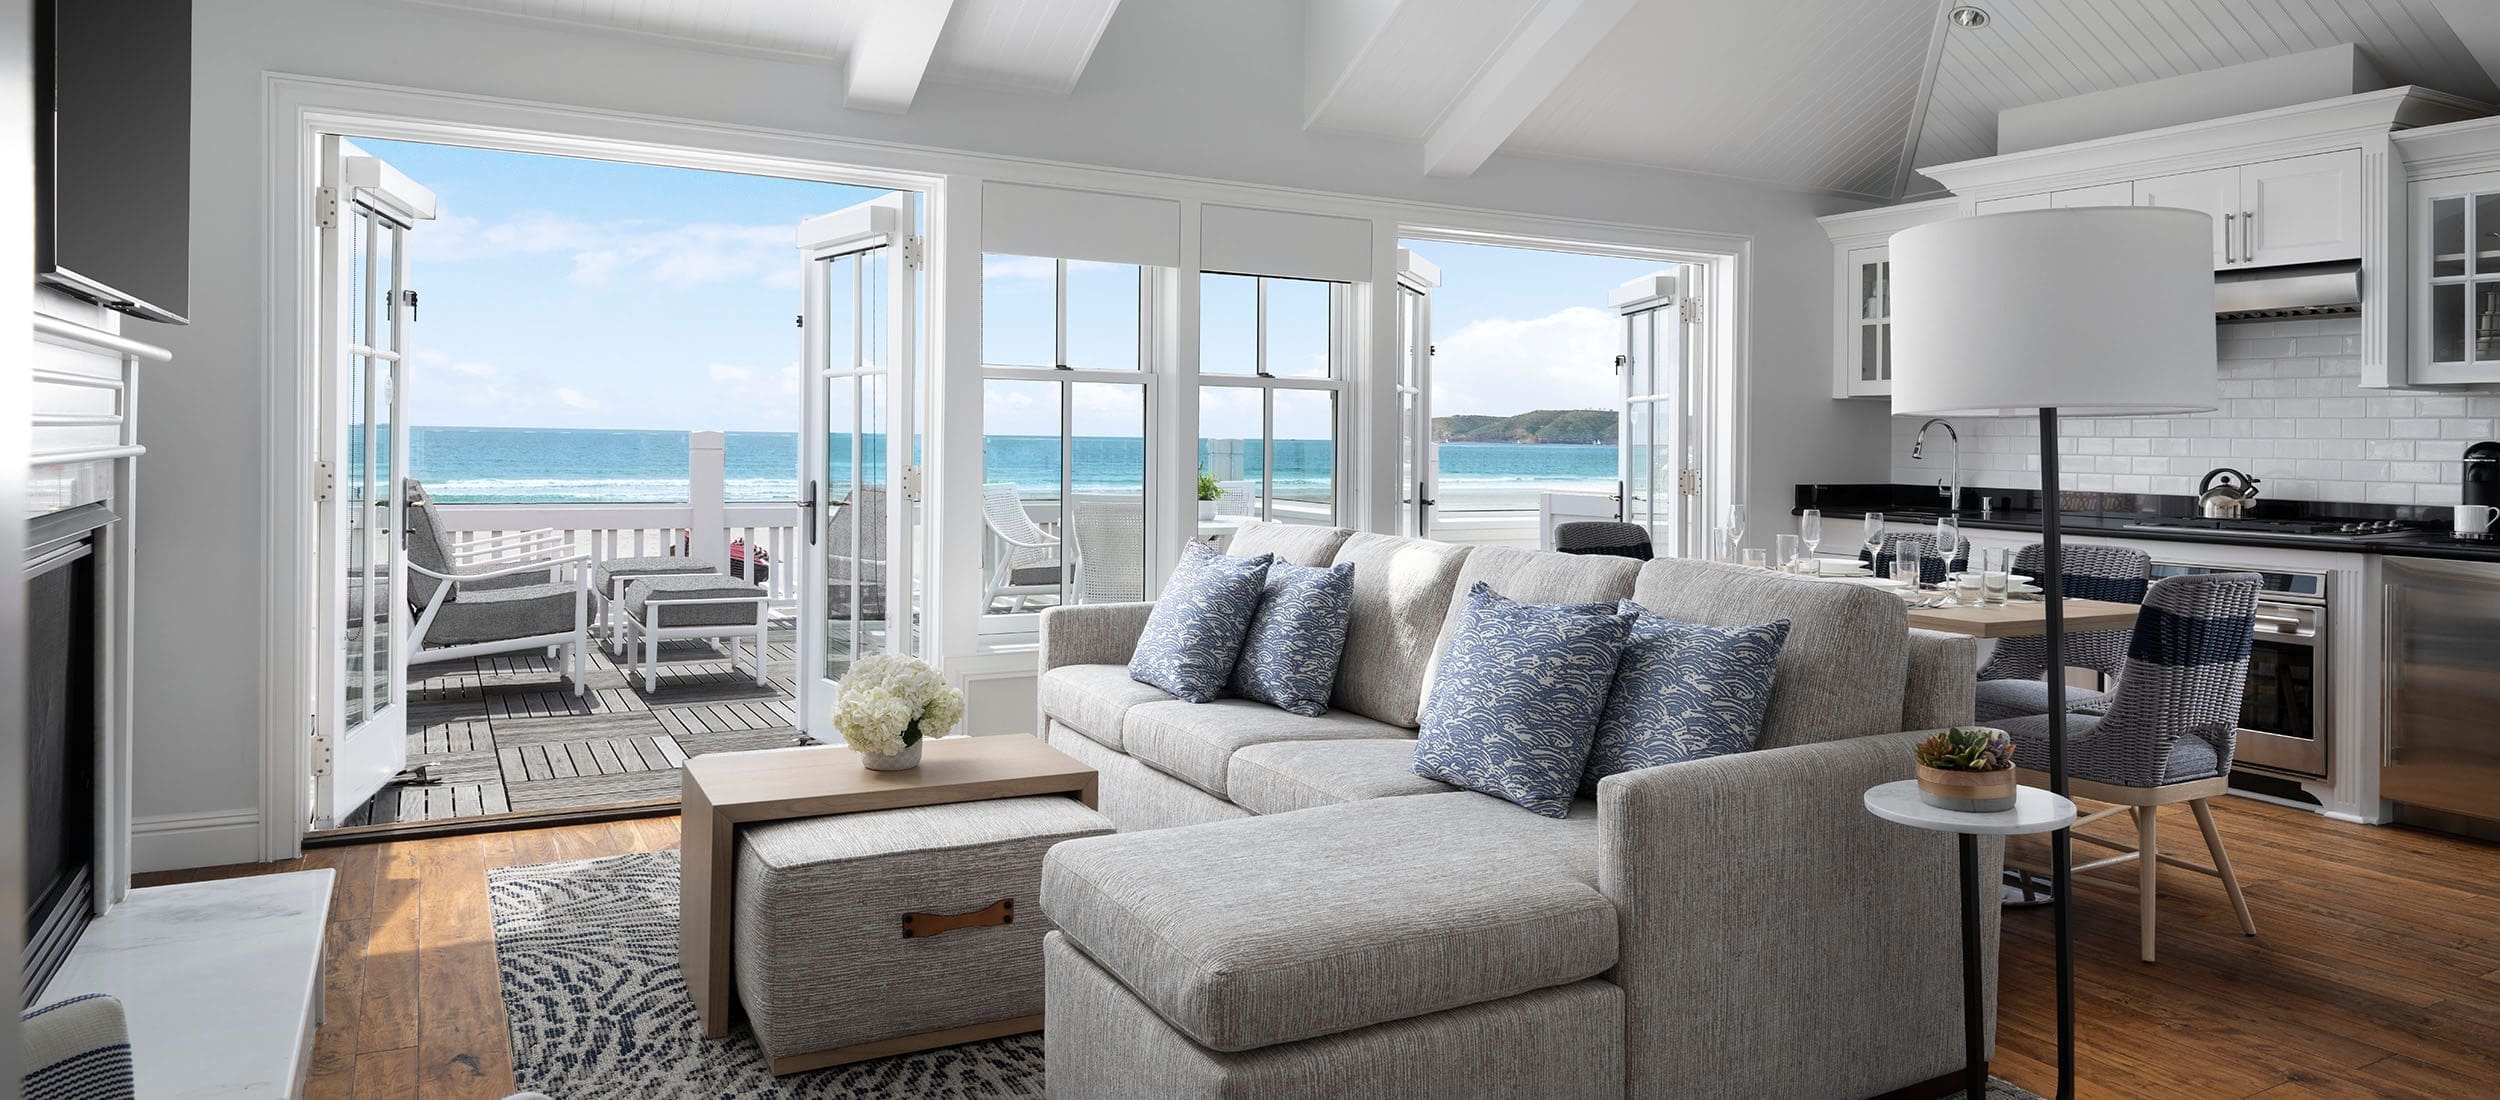 Oceanfront Cottage Living Area